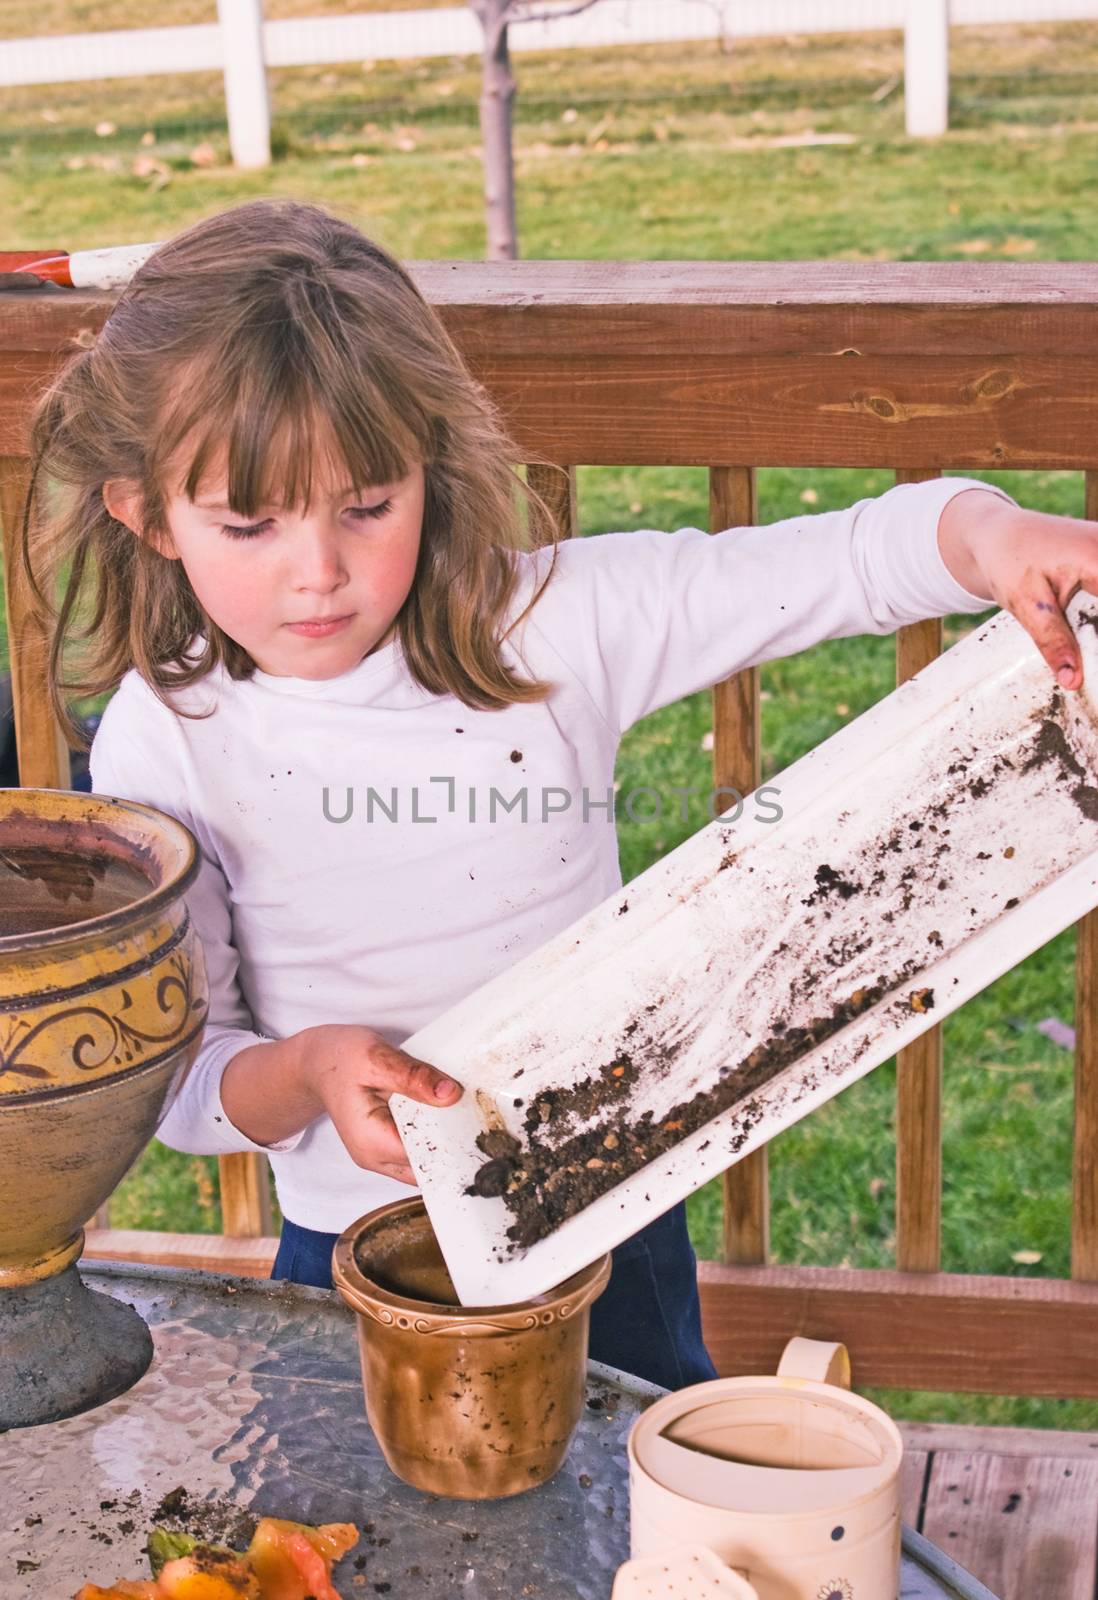 Little Girl Playing With Planters And Soil by rcarner